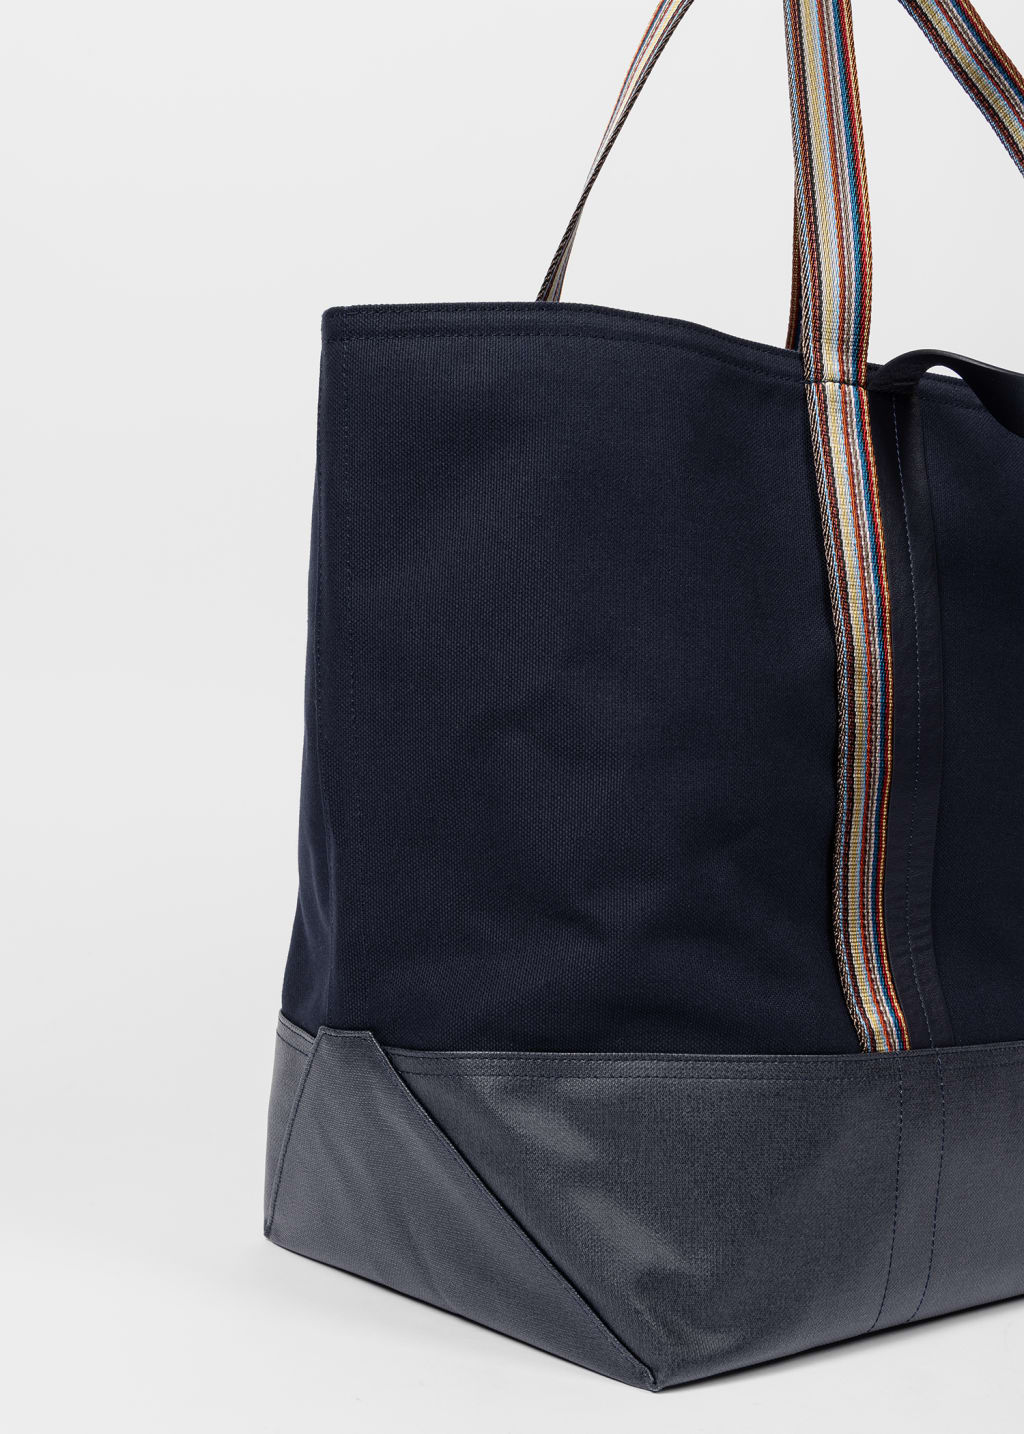 Detail View - Navy Canvas Tote Bag with 'Signature Stripe' Straps Paul Smith